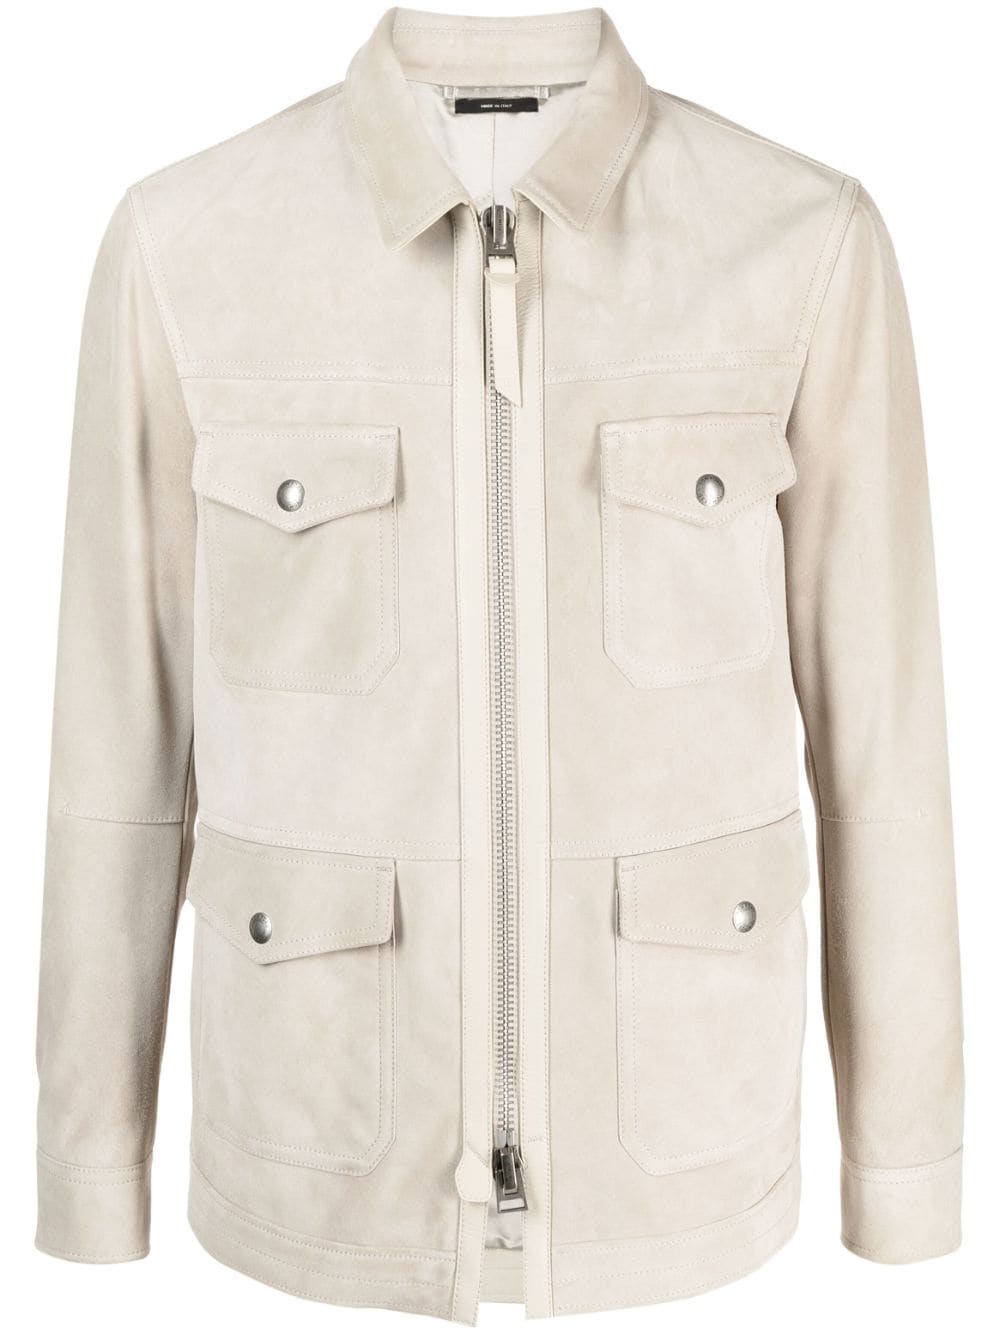 TOM FORD zip-up Suede Shirt Jacket - Farfetch